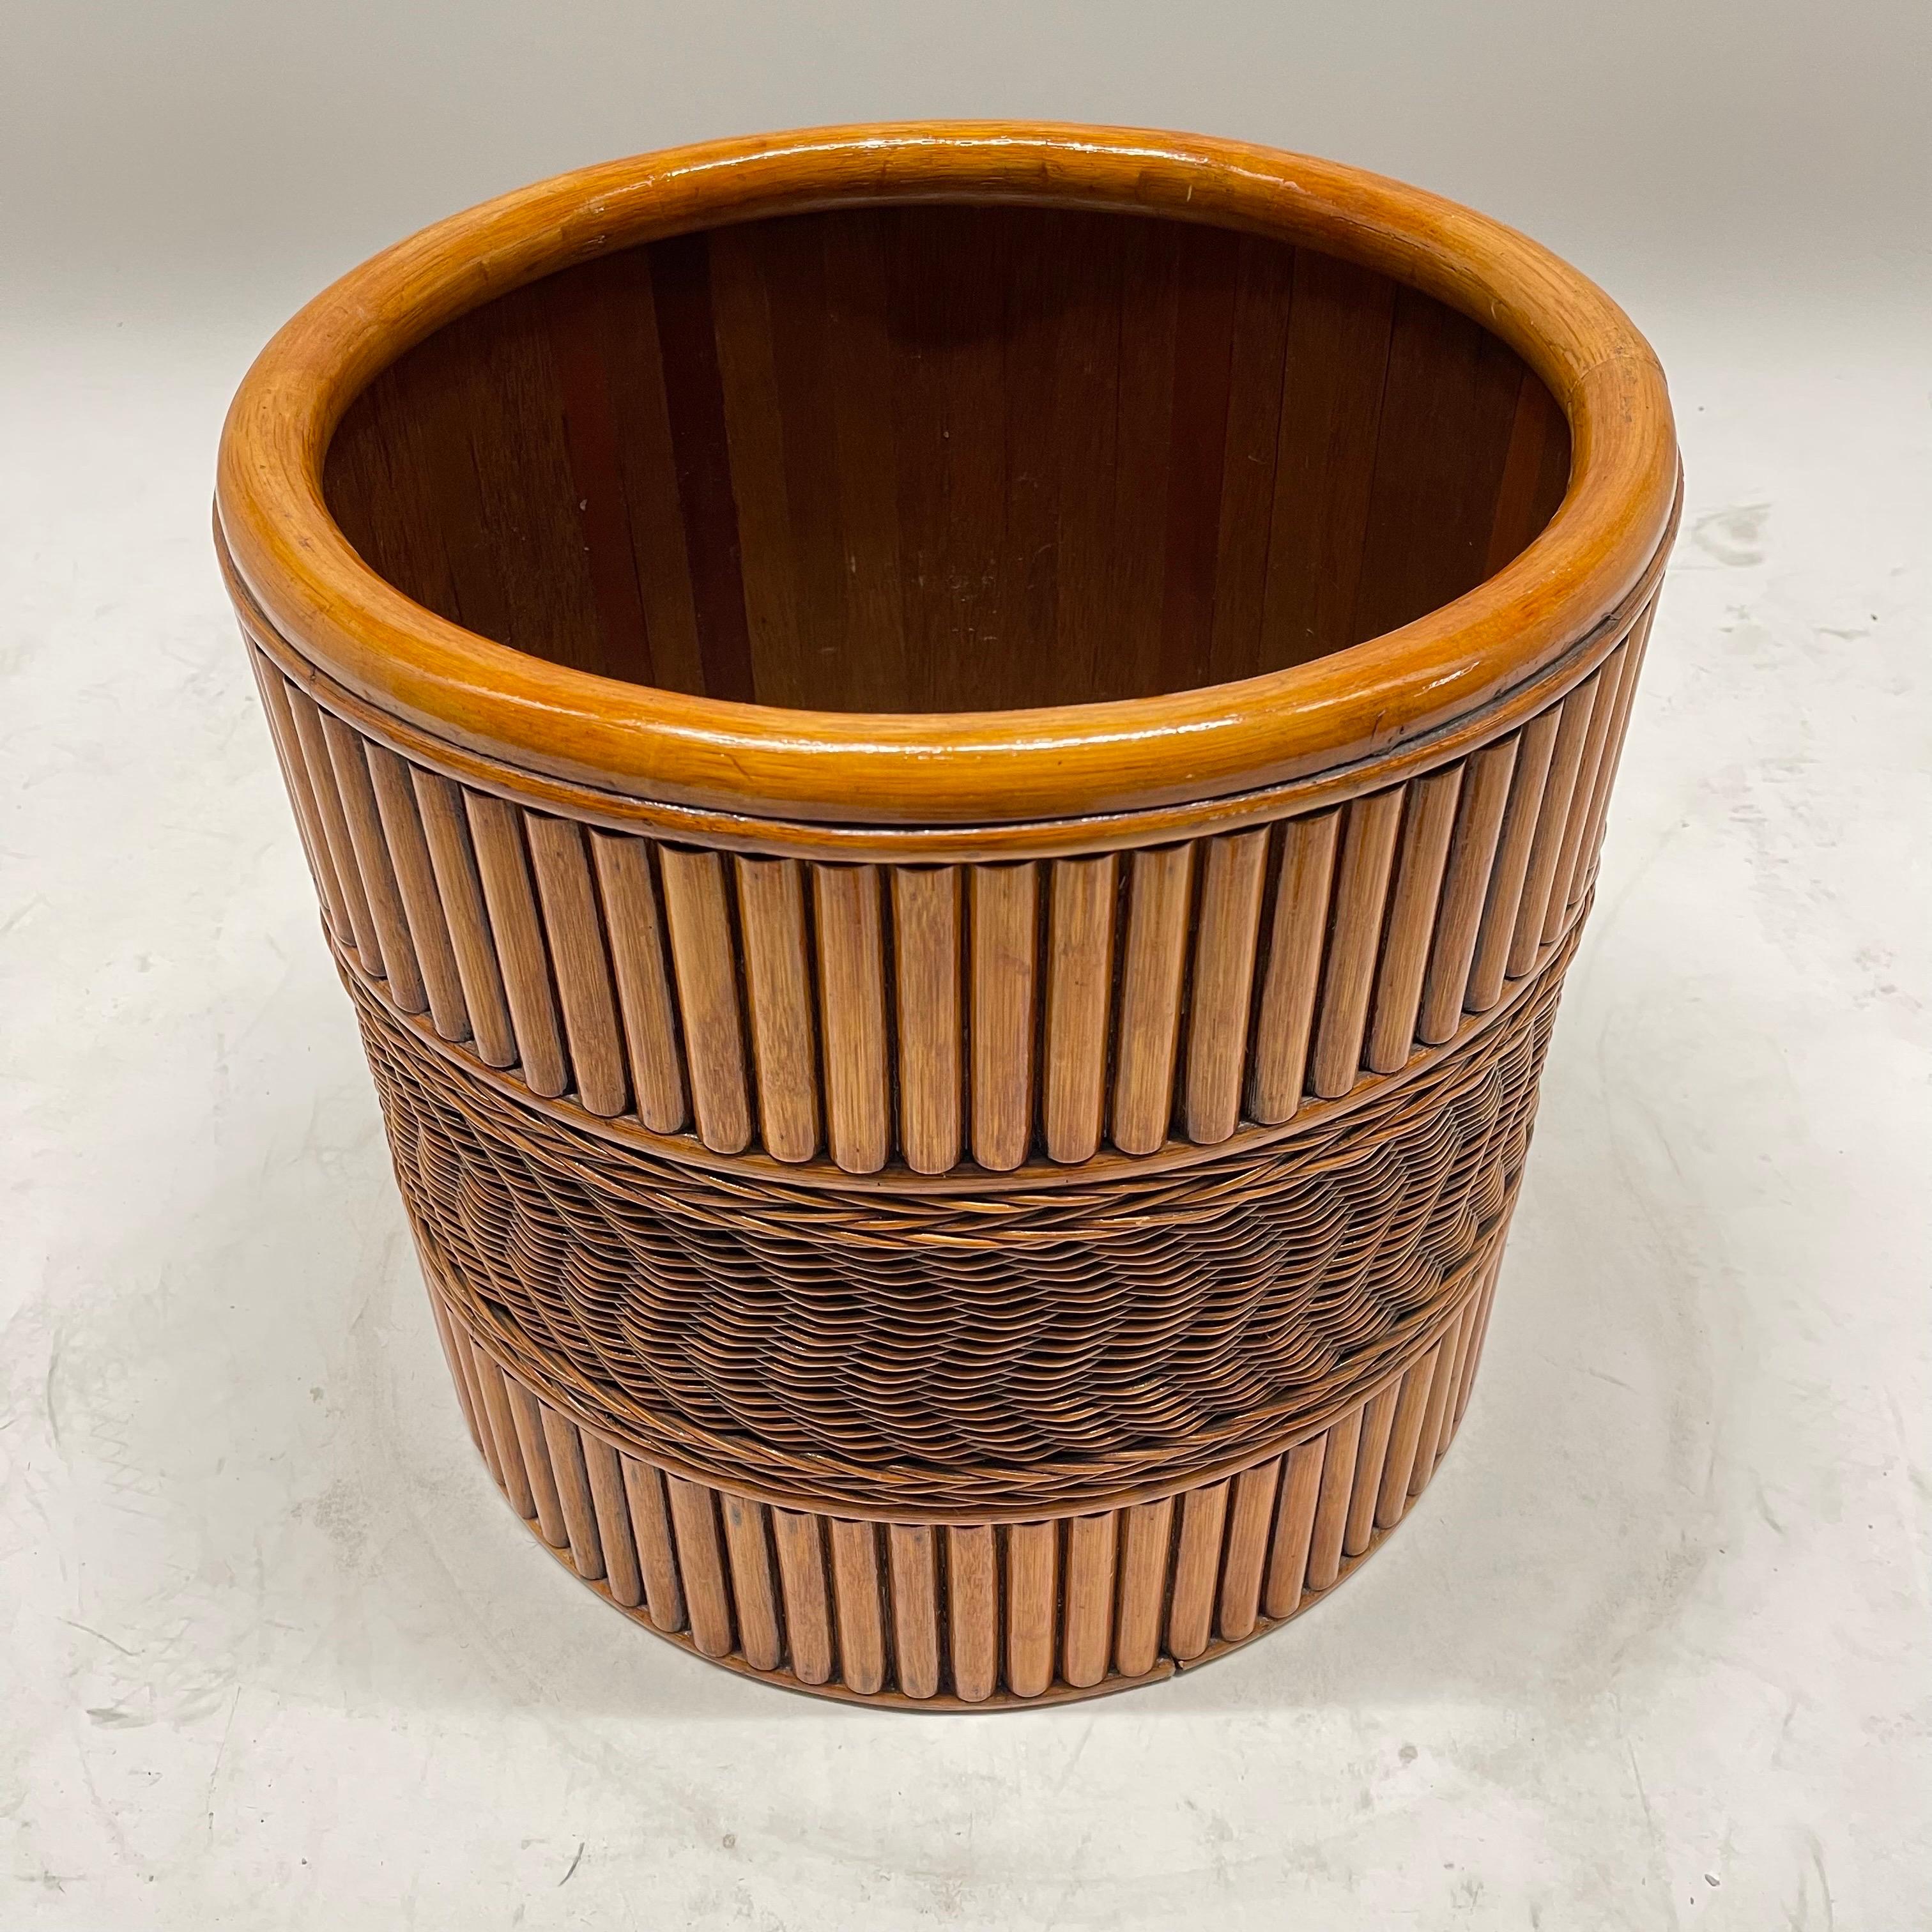 Intricate graphic and geometric midcentury planter or garden pot basket. Rendered in handwoven wicker with a reeded design of rattan slats. USA, circa 1970s.

Interior dimensions:
16